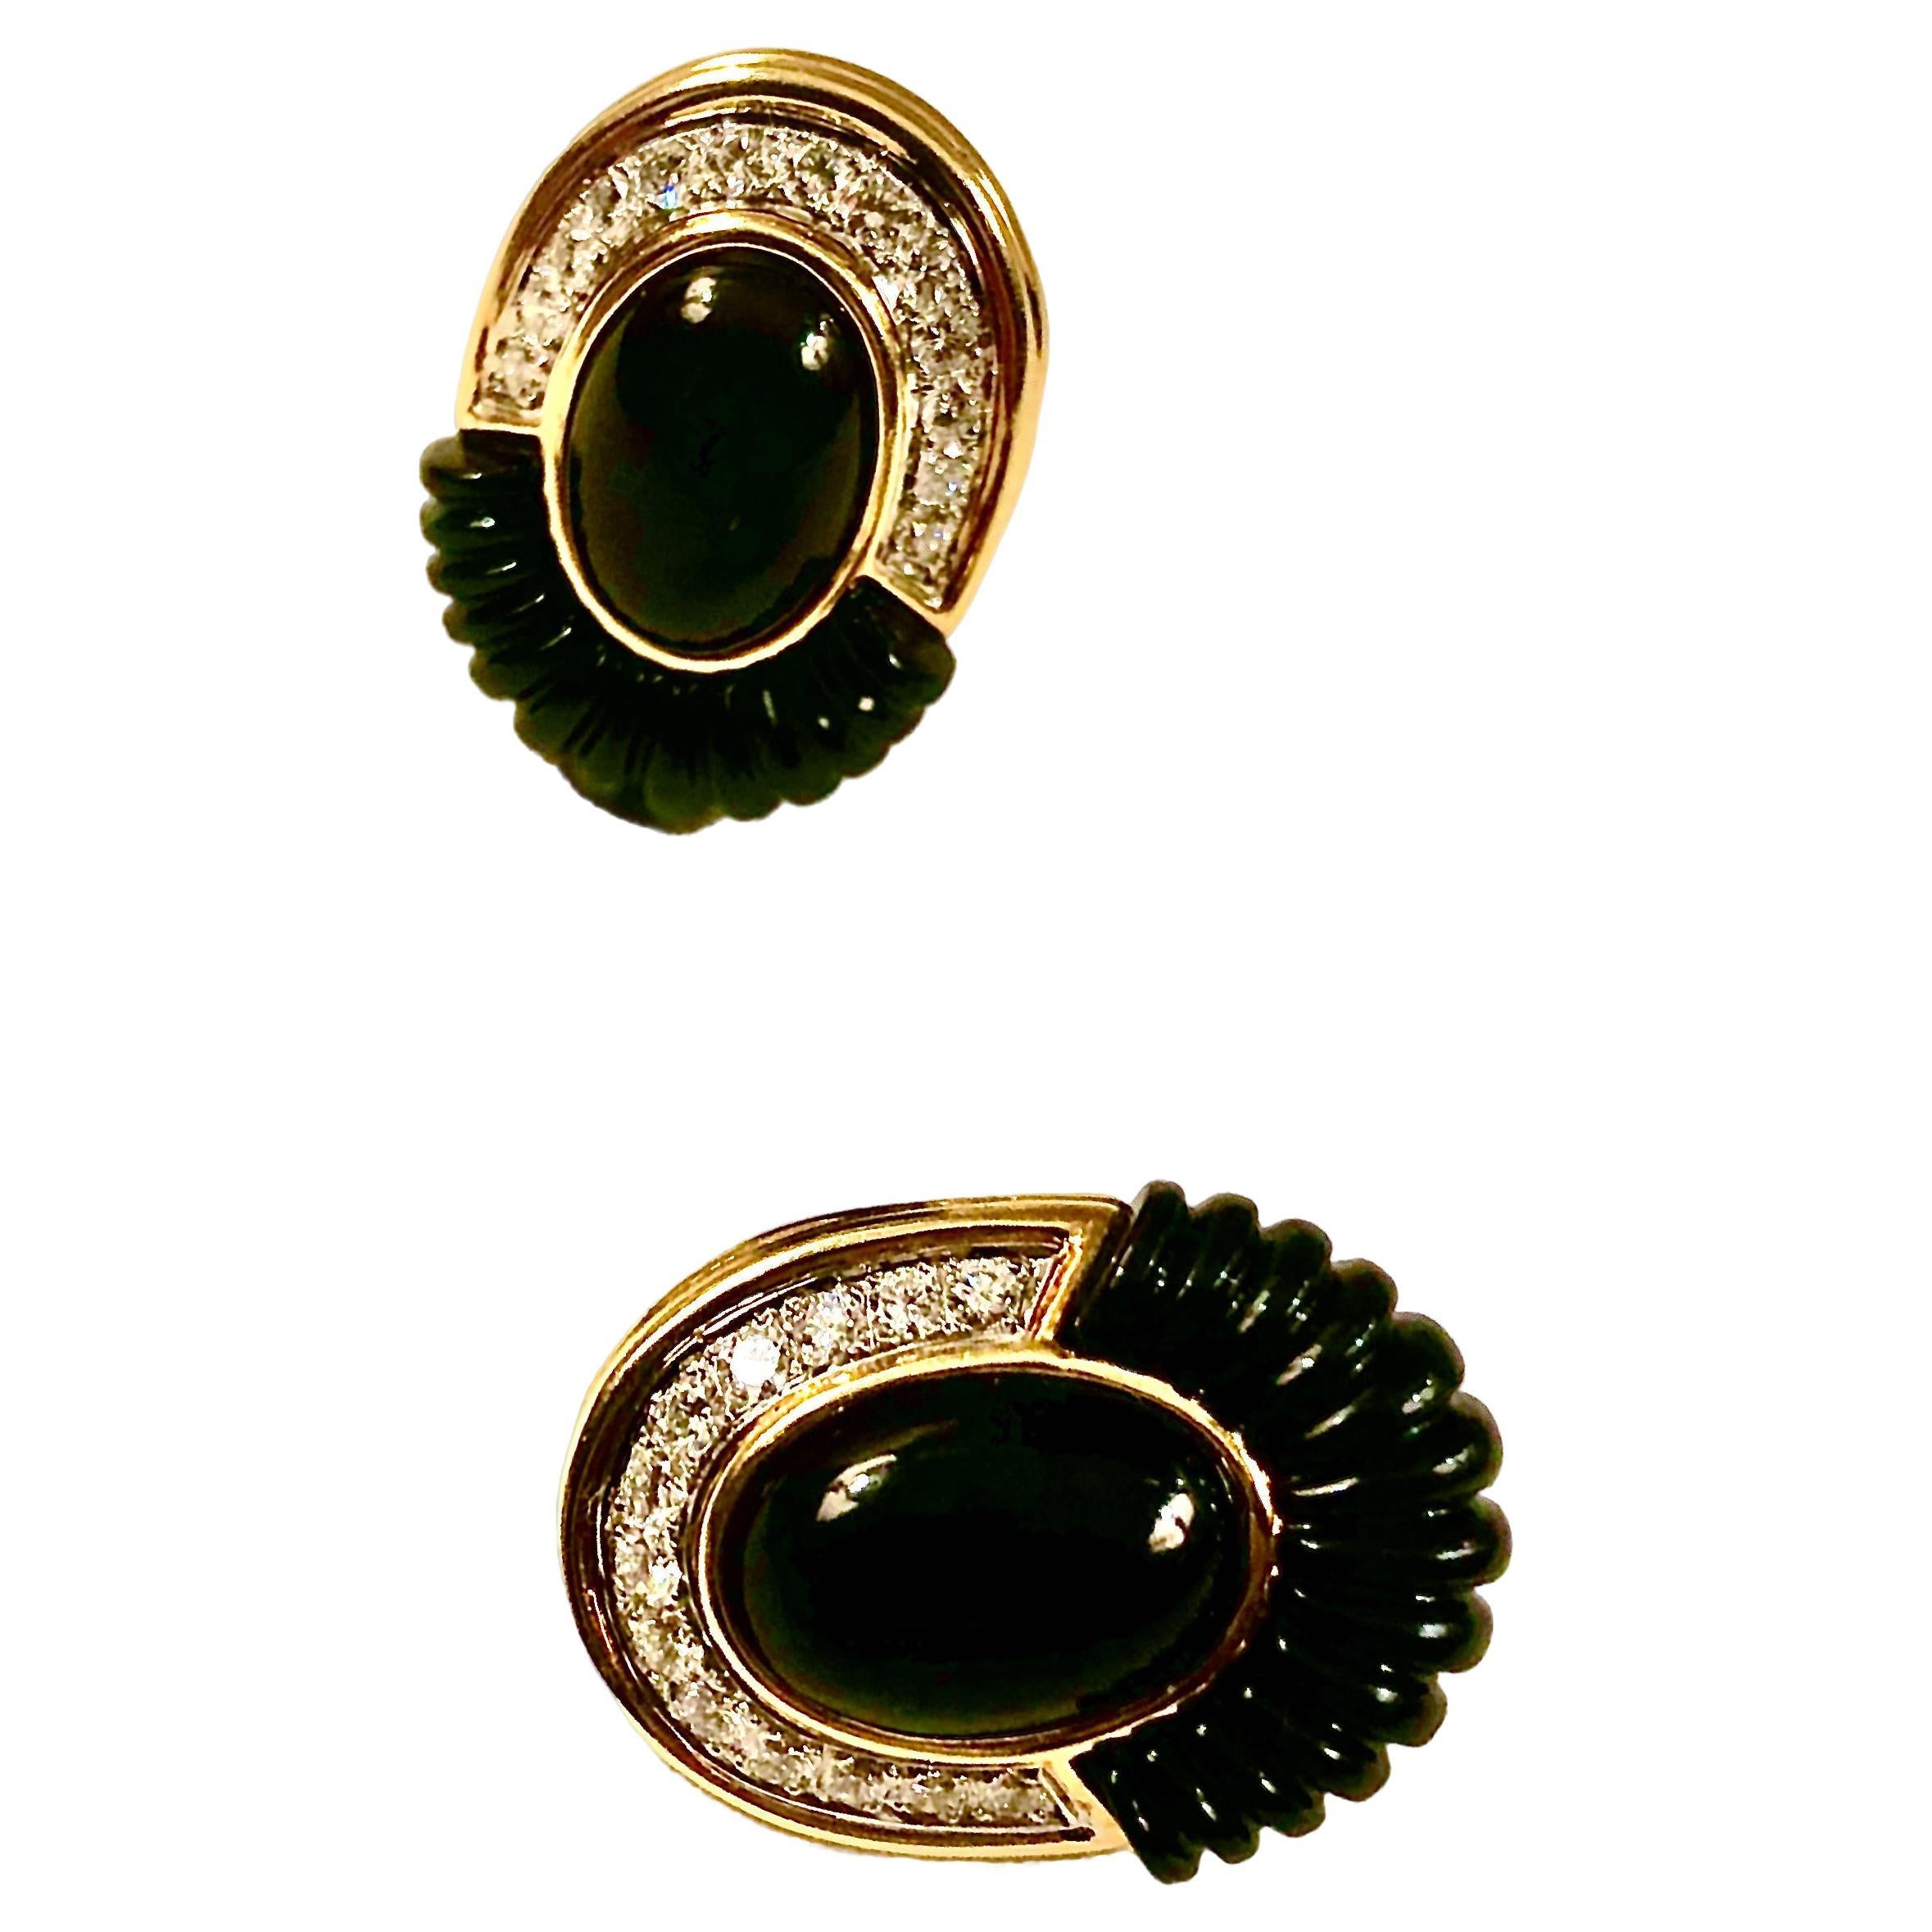 ﻿Handsome and chic large clip earrings in a timeless and simple style which frame the face perfectly. These earrings are evocative of mid century Cartier designs of the 1970’s and beyond.

The beautifully carved fluted black onyx elements are